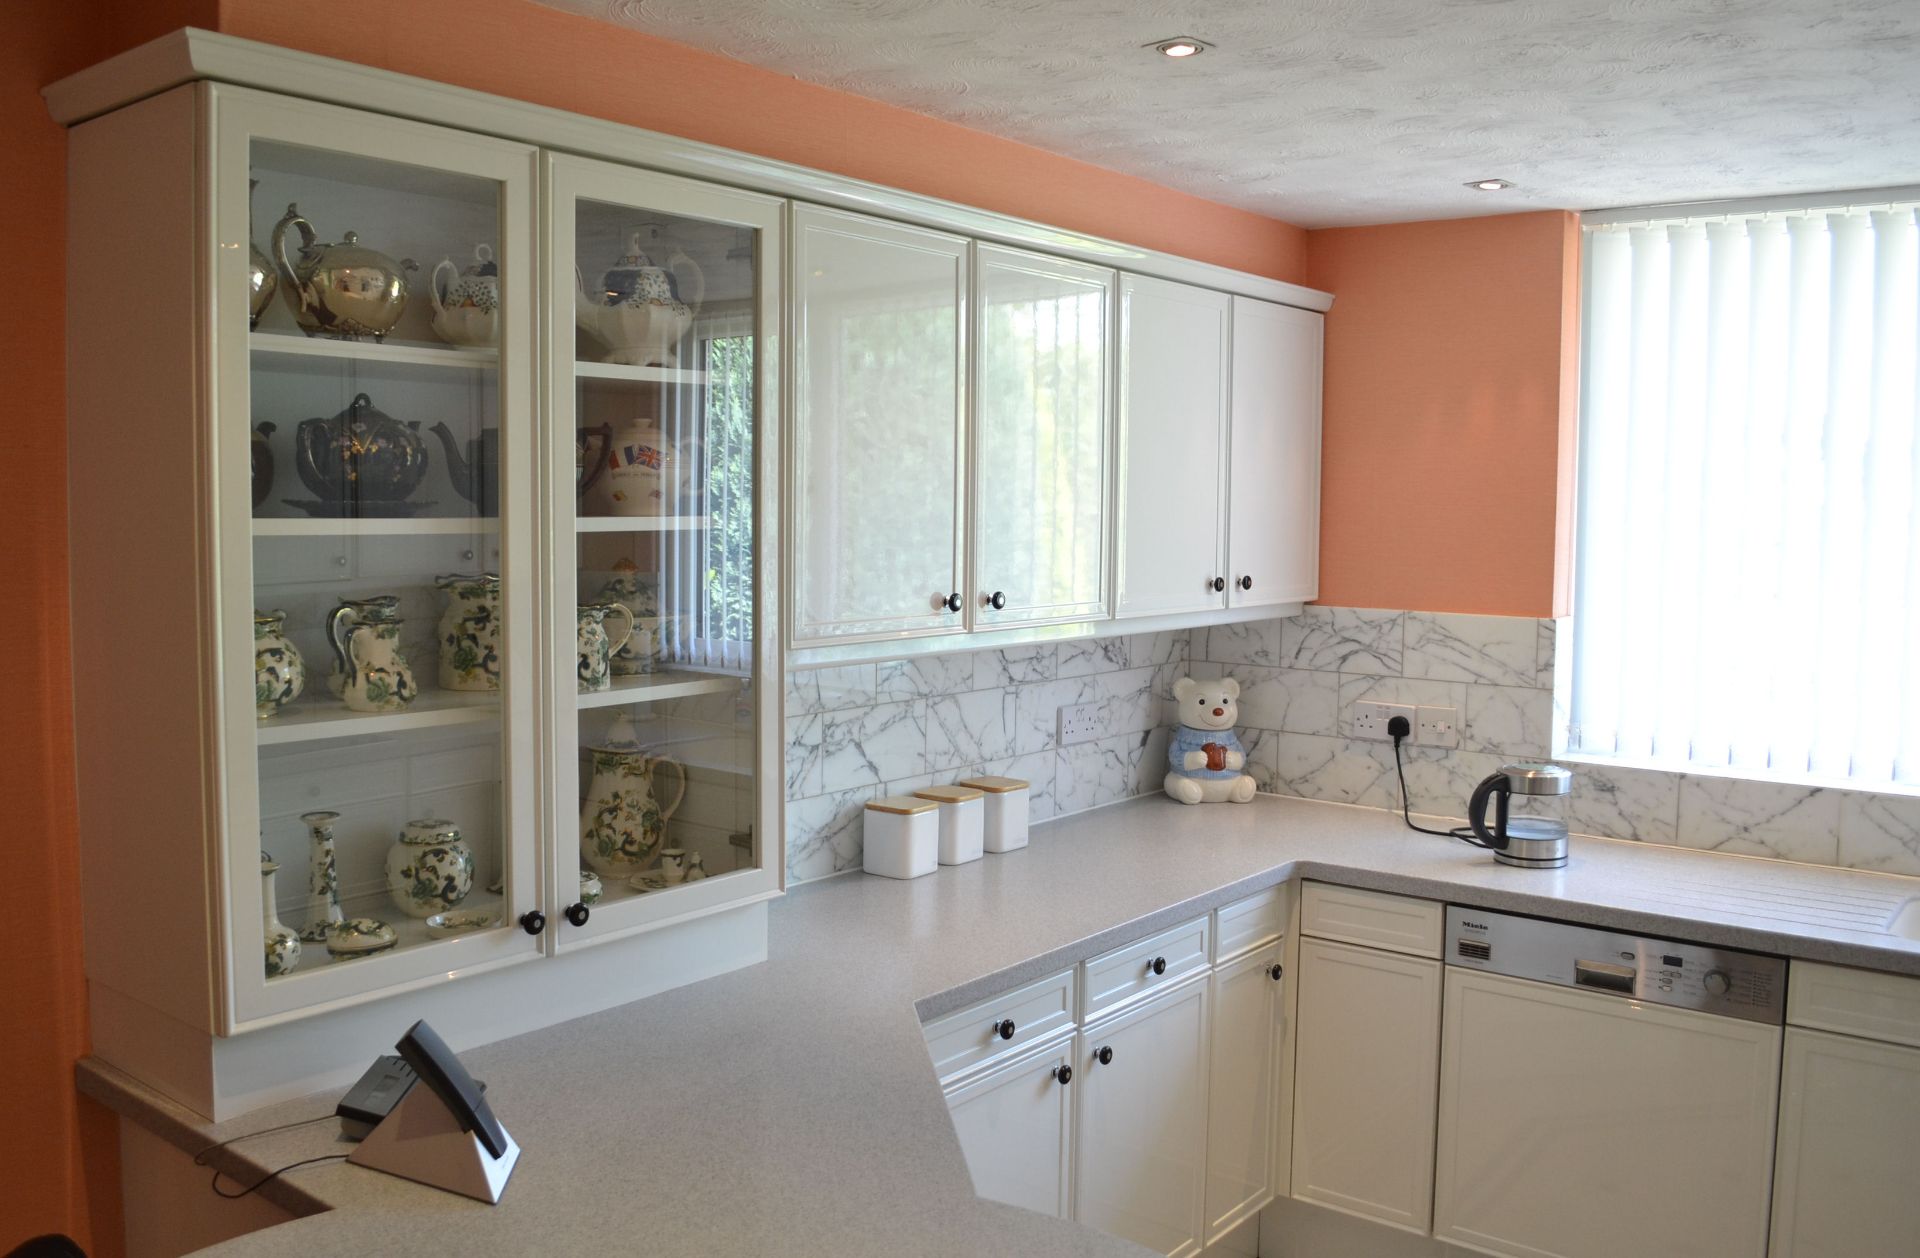 1 x Stunning Bespoke Siematic Gloss White Fitted Kitchen With Corian Worktops - NO VAT ON HAMMER - Image 5 of 18